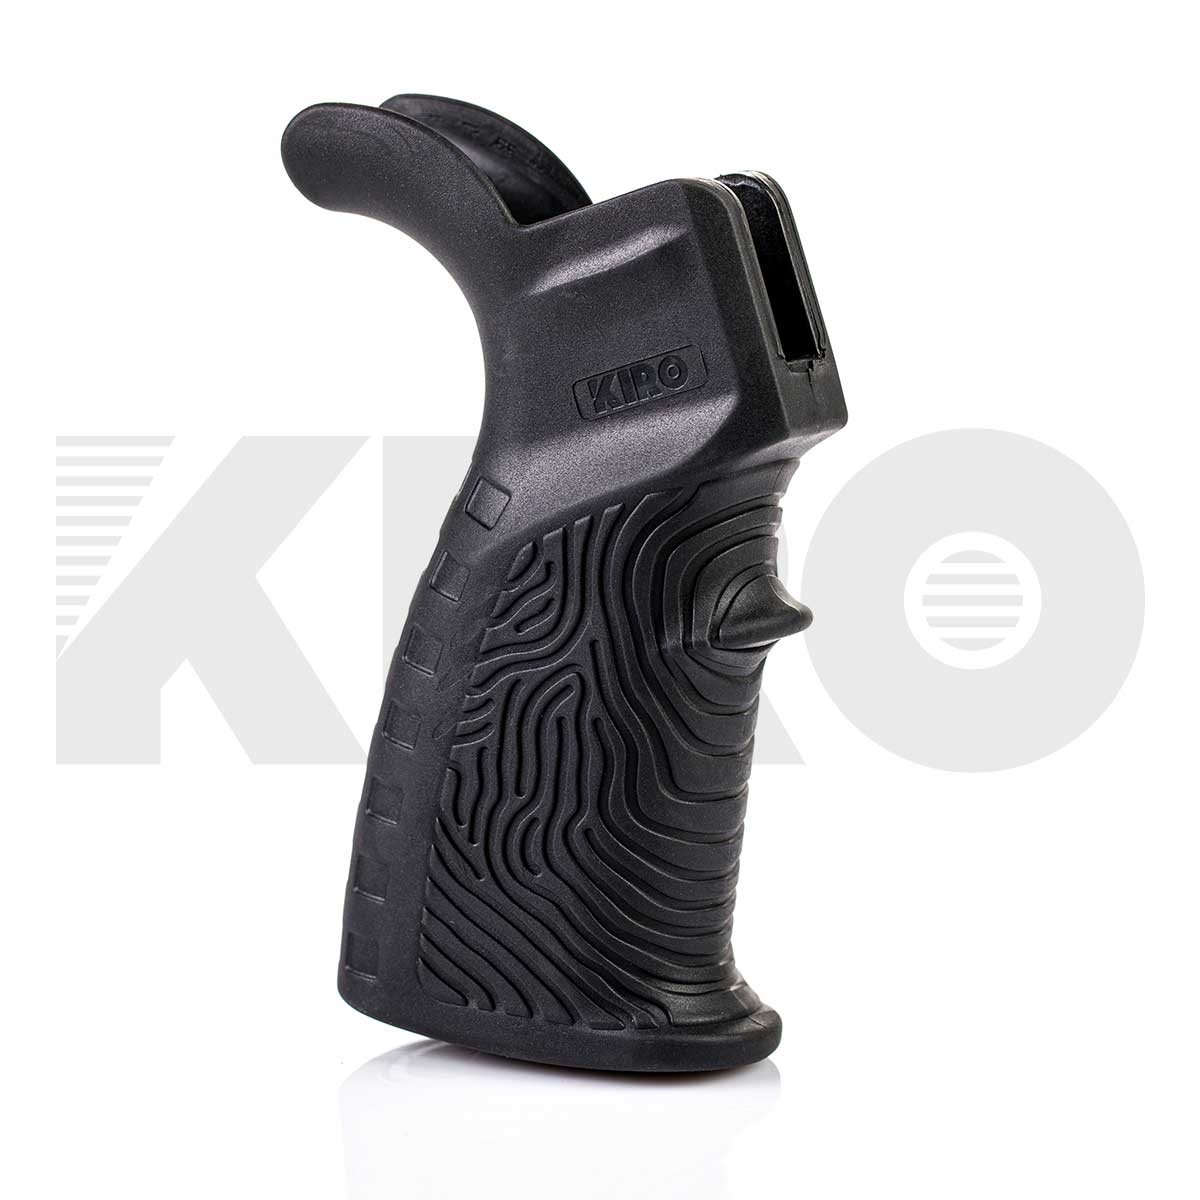 KIRO RBG15 - Rubberized Battle Grip for AR15 with Beavertail & Sealed Compartment